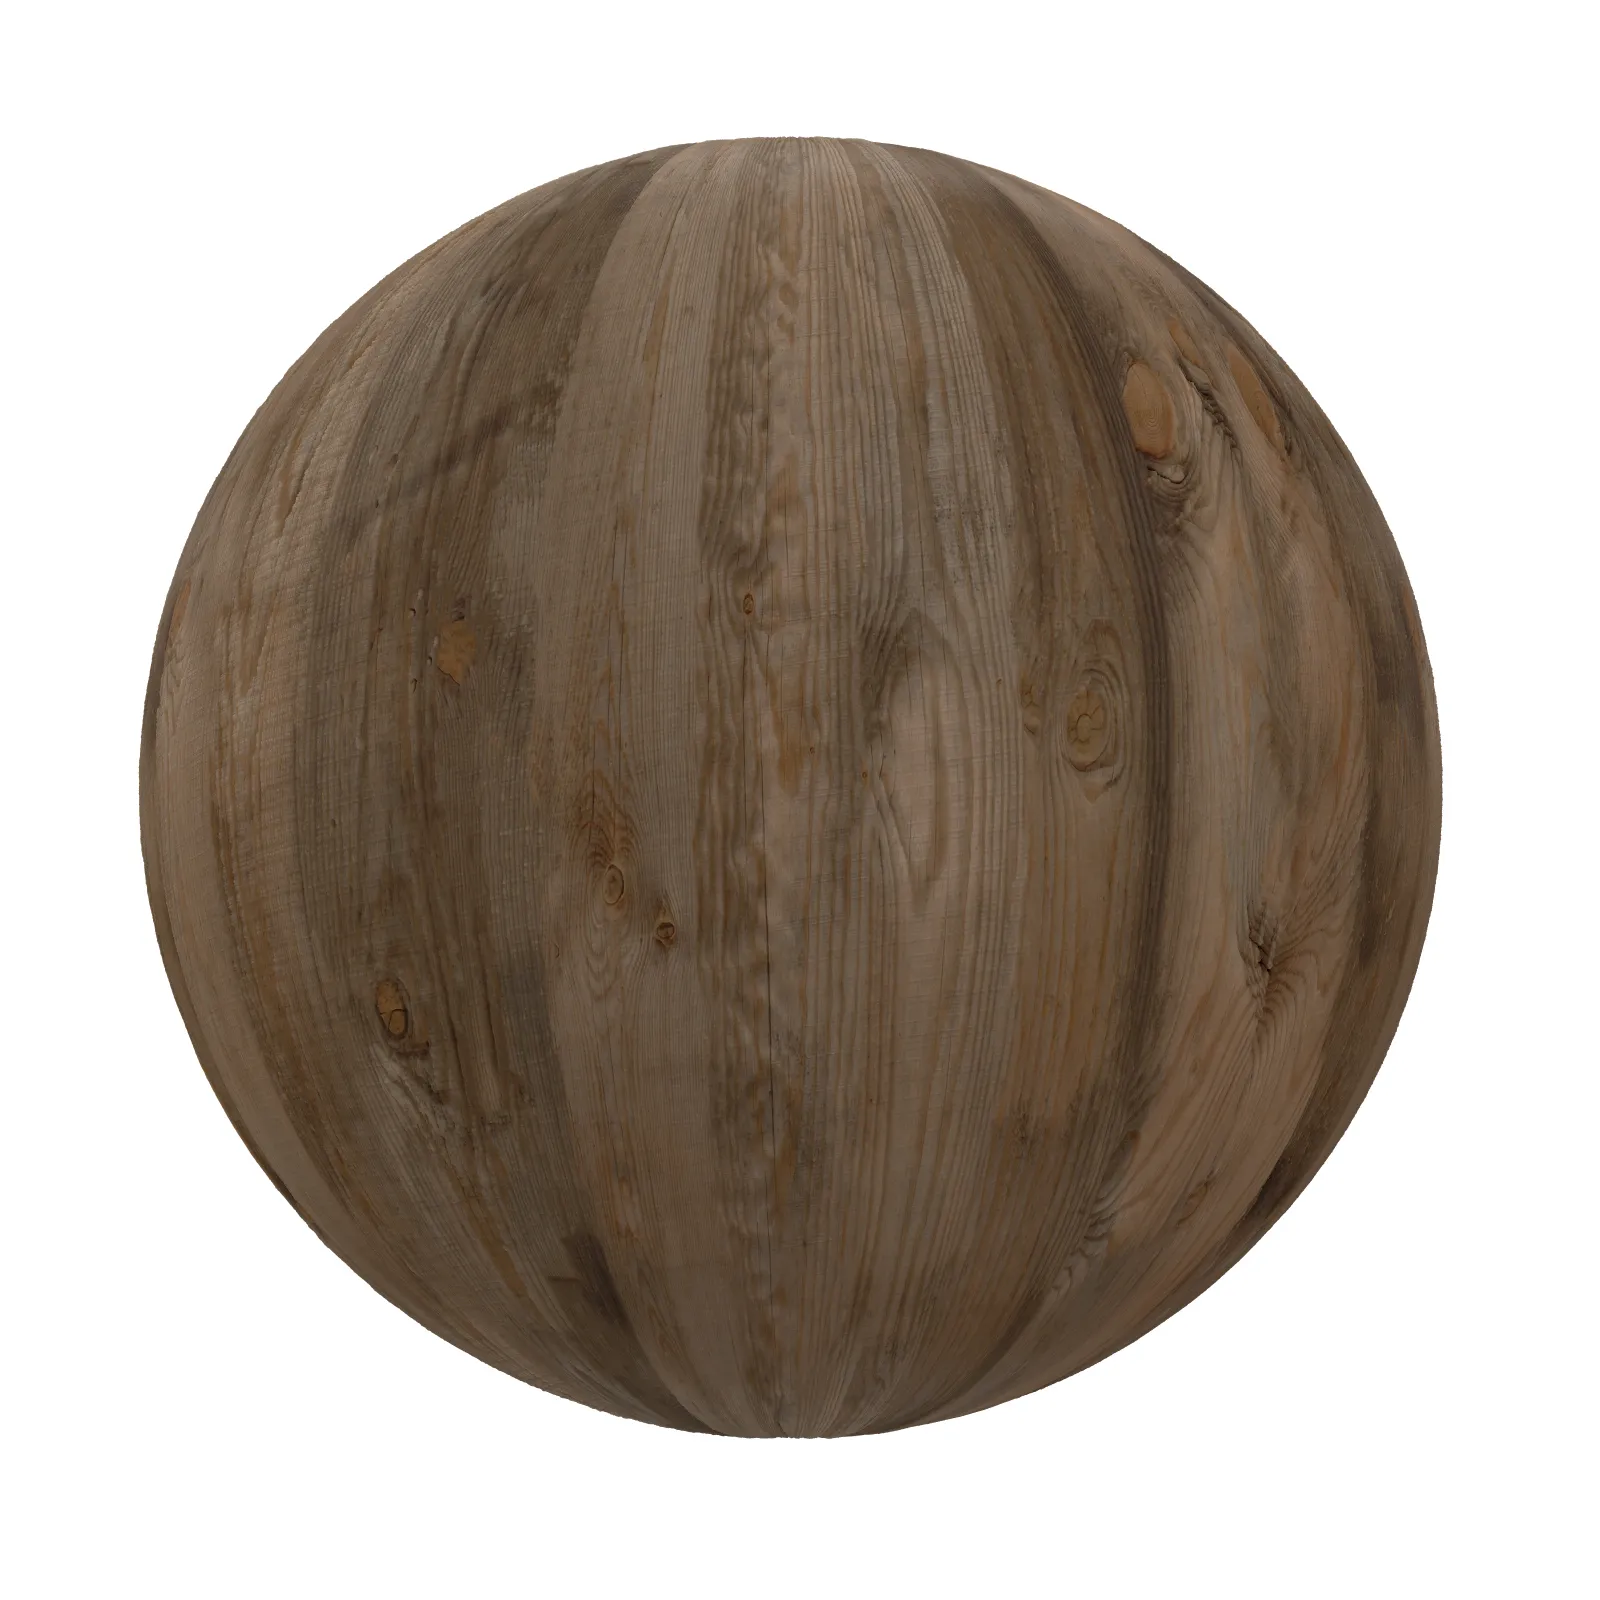 TEXTURES – WOOD – Old Wood 1